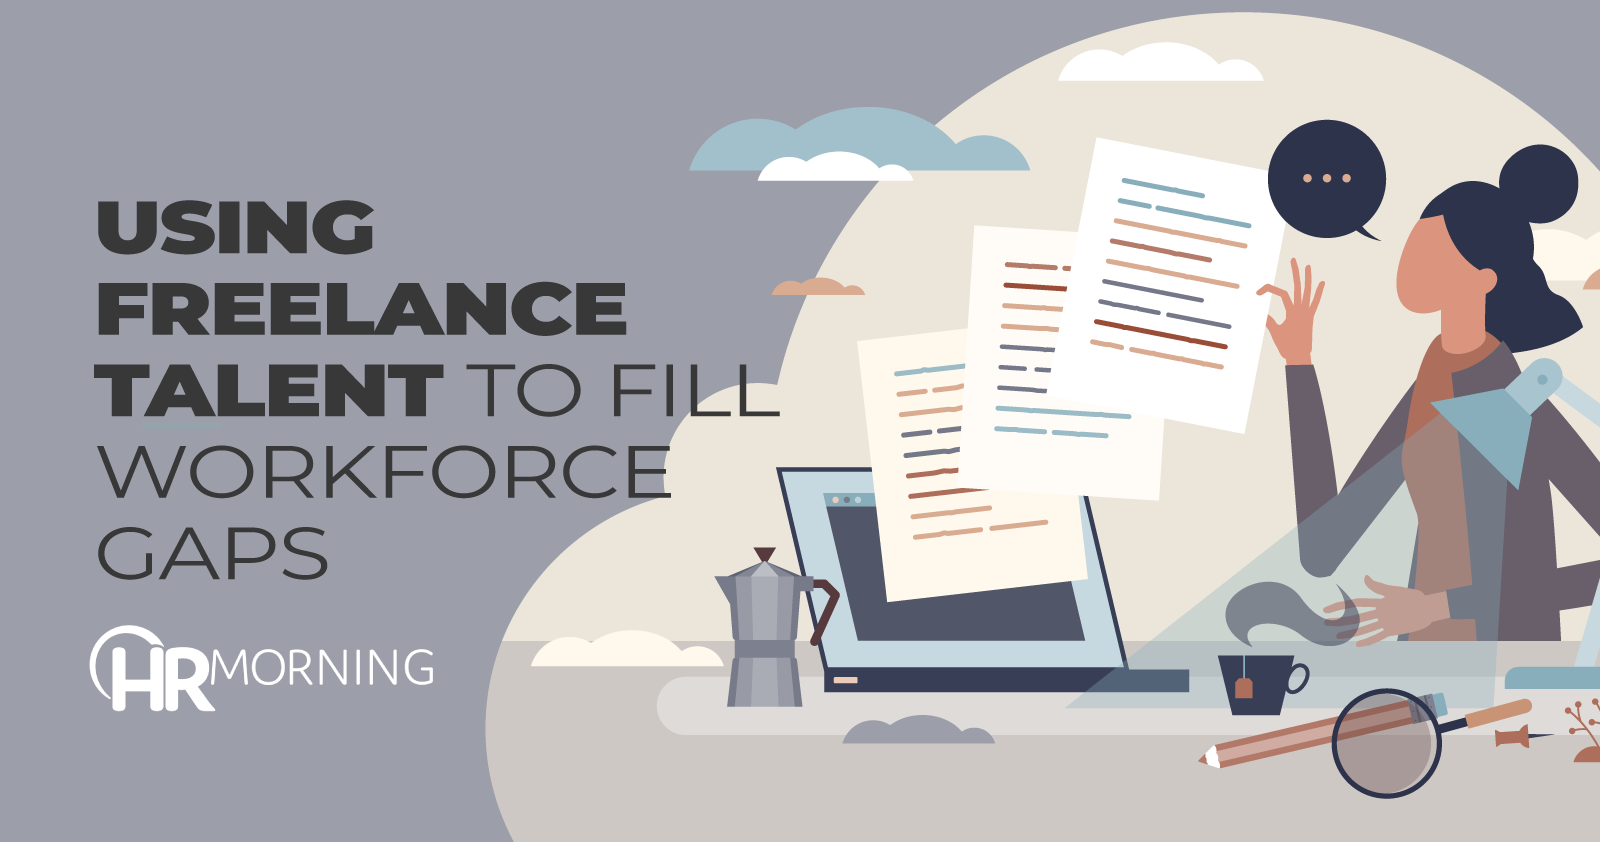 Using freelance talent to fill workforce gaps